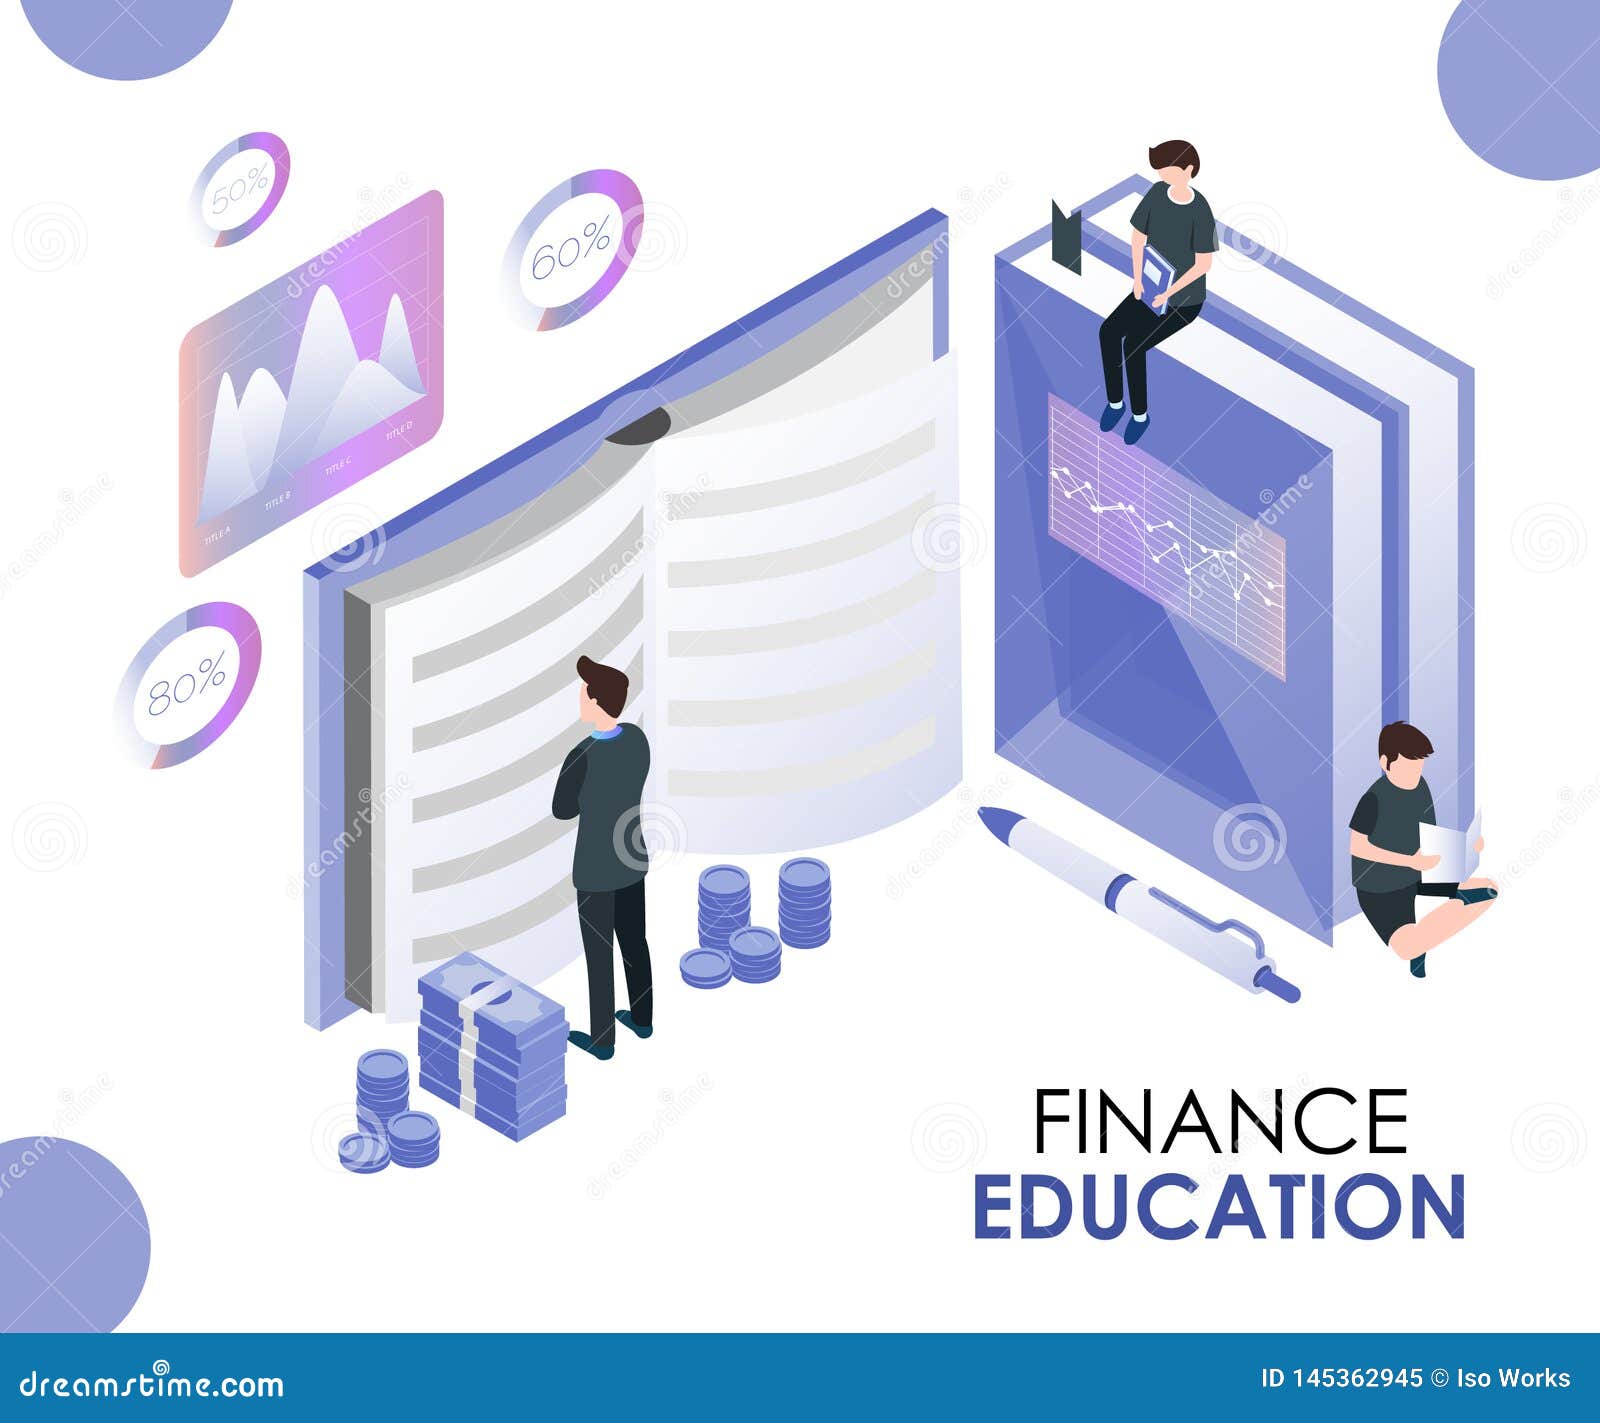 finance education is been given to the people regarding how to save money isometric artwork concept